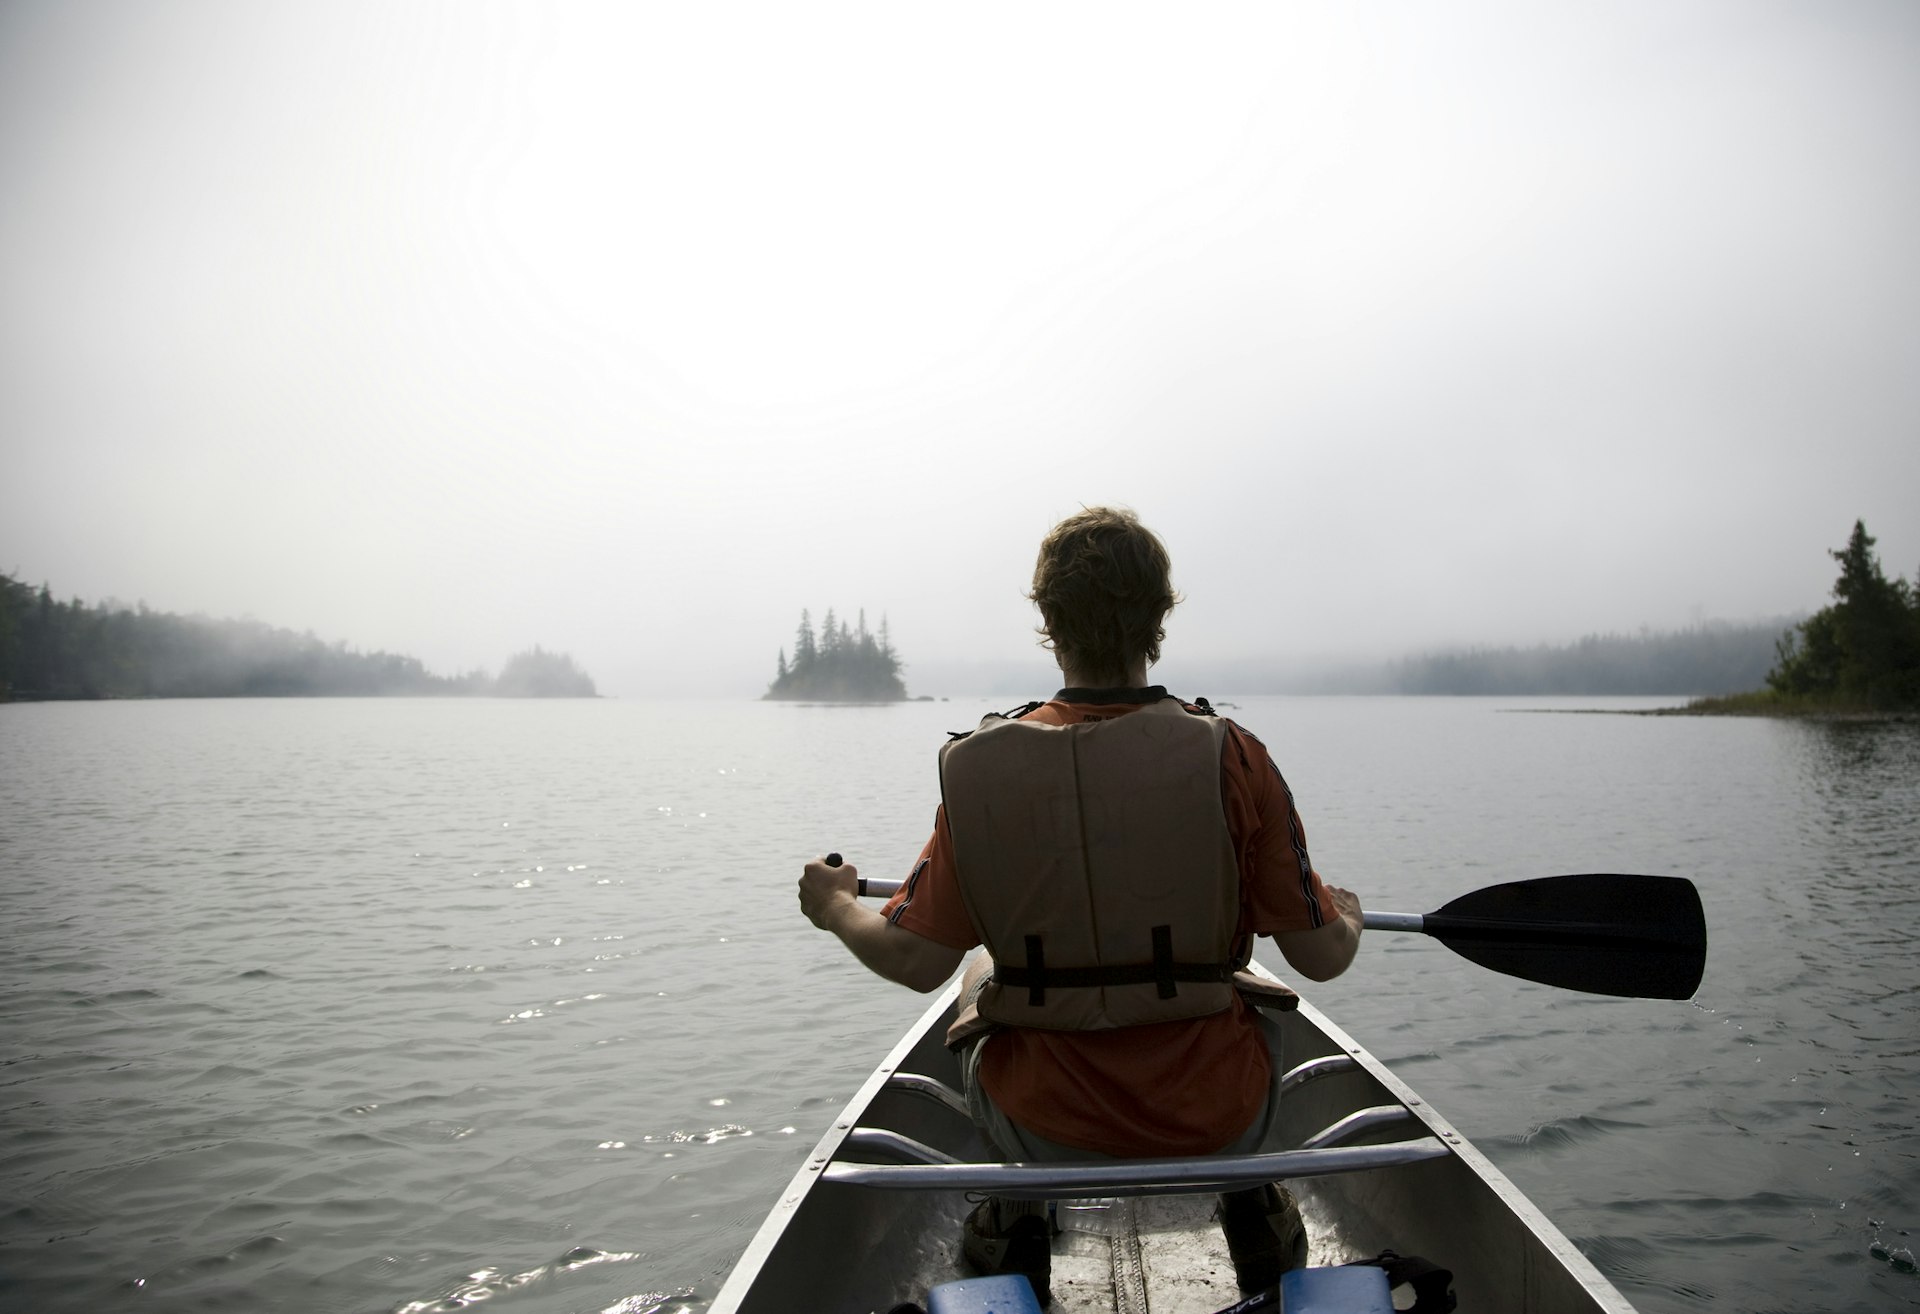 looking from behind me see a man in a canoe paddling across a misty lake near Isle Royale